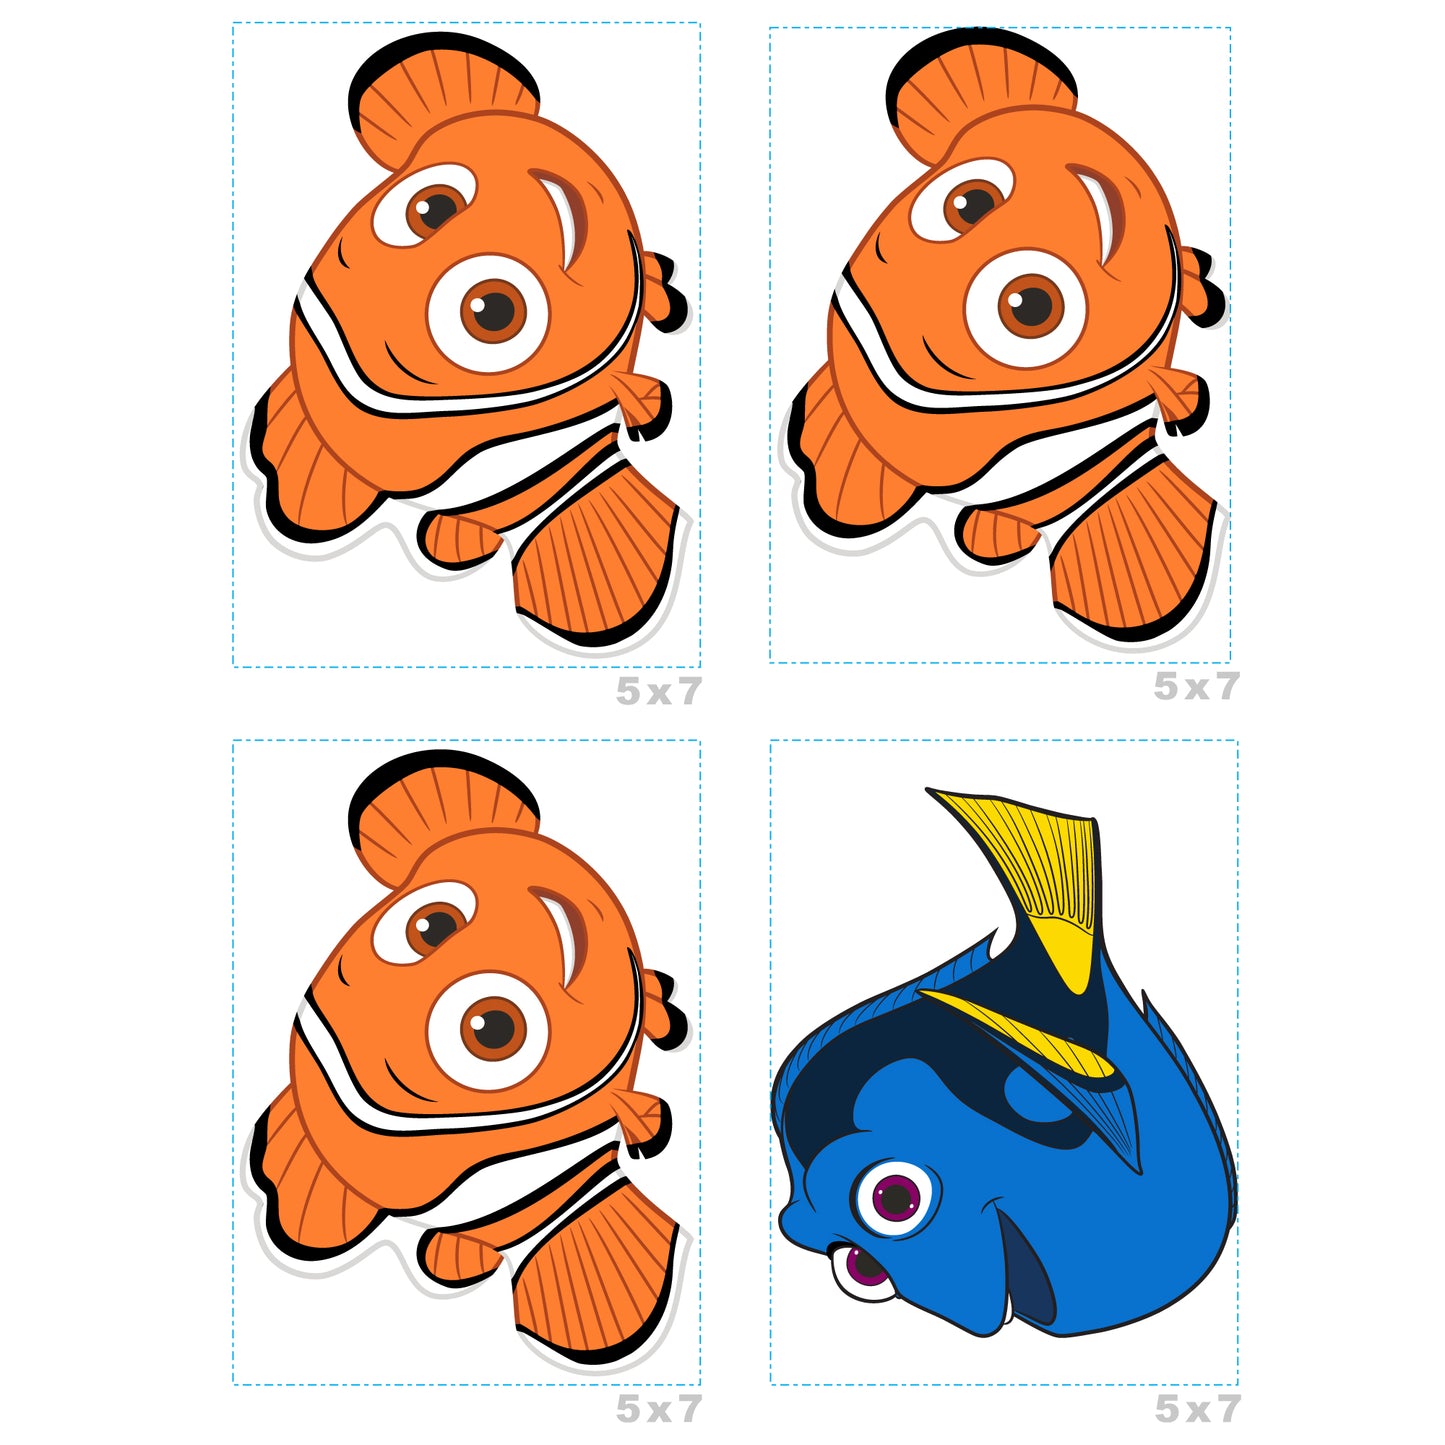 Sheet of 4 -FINDING NEMO: Nemo Minis        - Officially Licensed Disney Removable Wall   Adhesive Decal